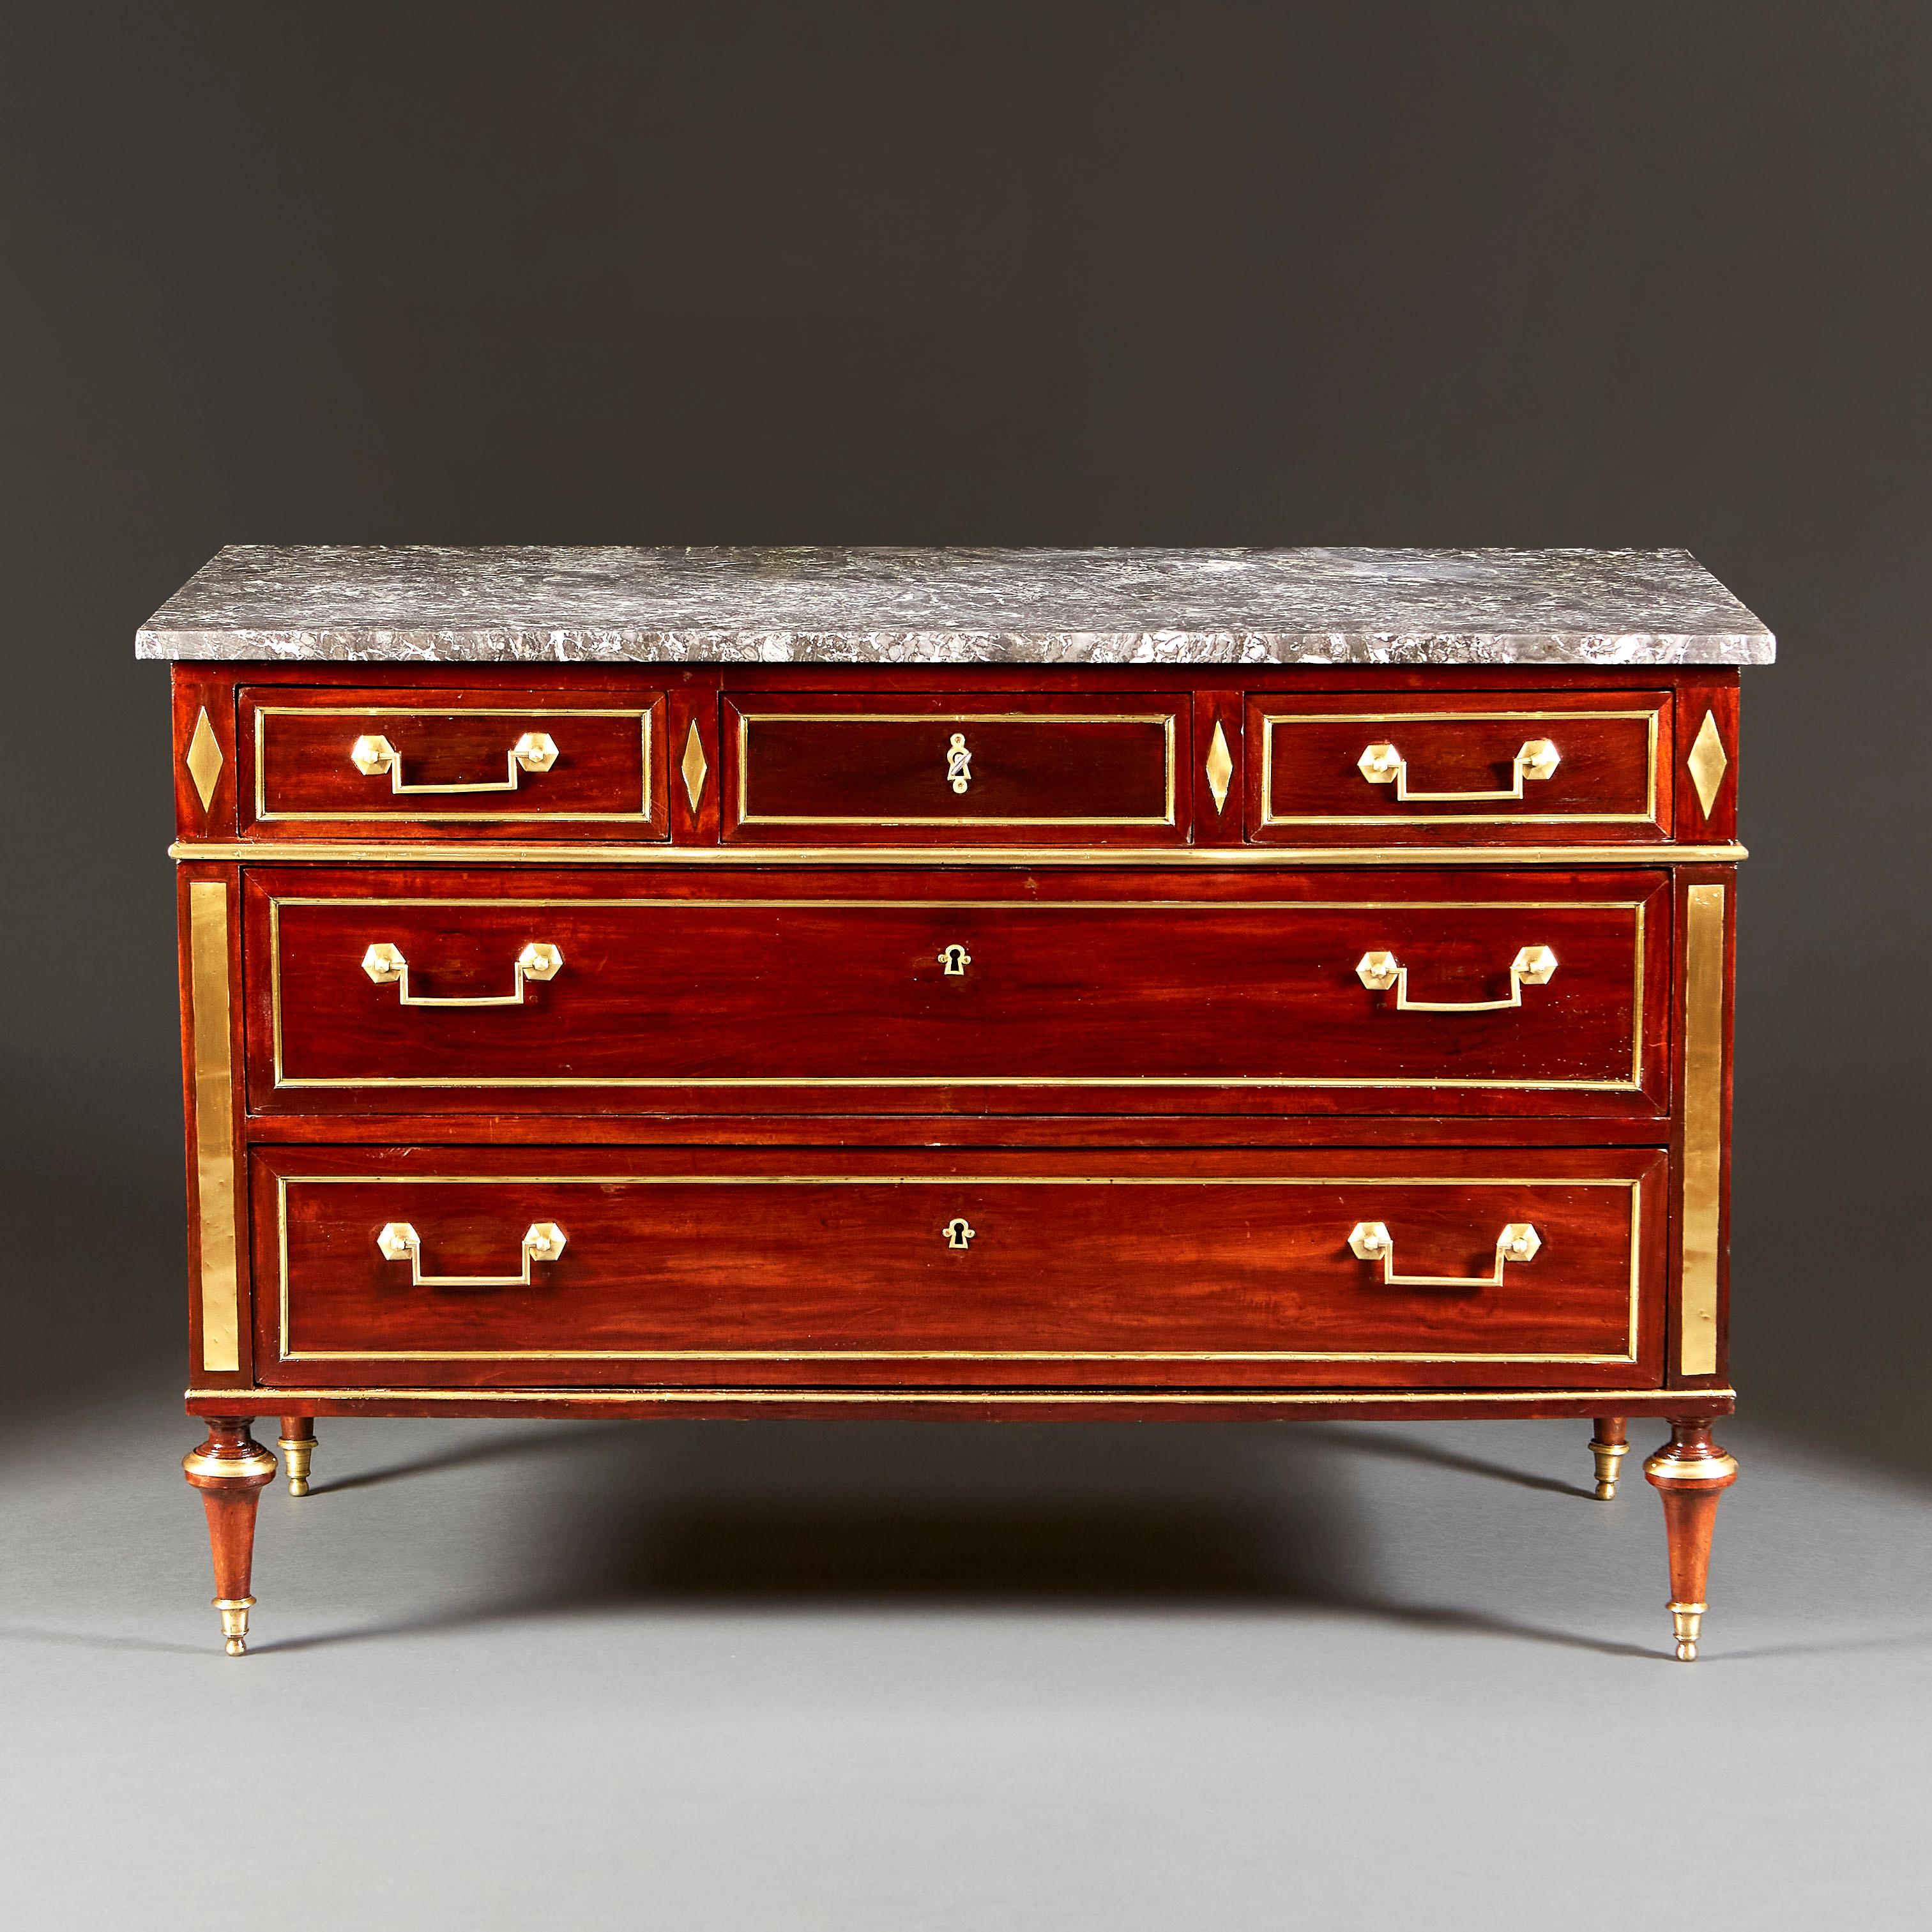 French, circa 1820

A fine early nineteenth century mahogany Empire commode, with three graduated drawers with a diamond brass inlay and rectangular lozenges of brass, retaining the original marble top. All supported on elongated topie feet.

Height